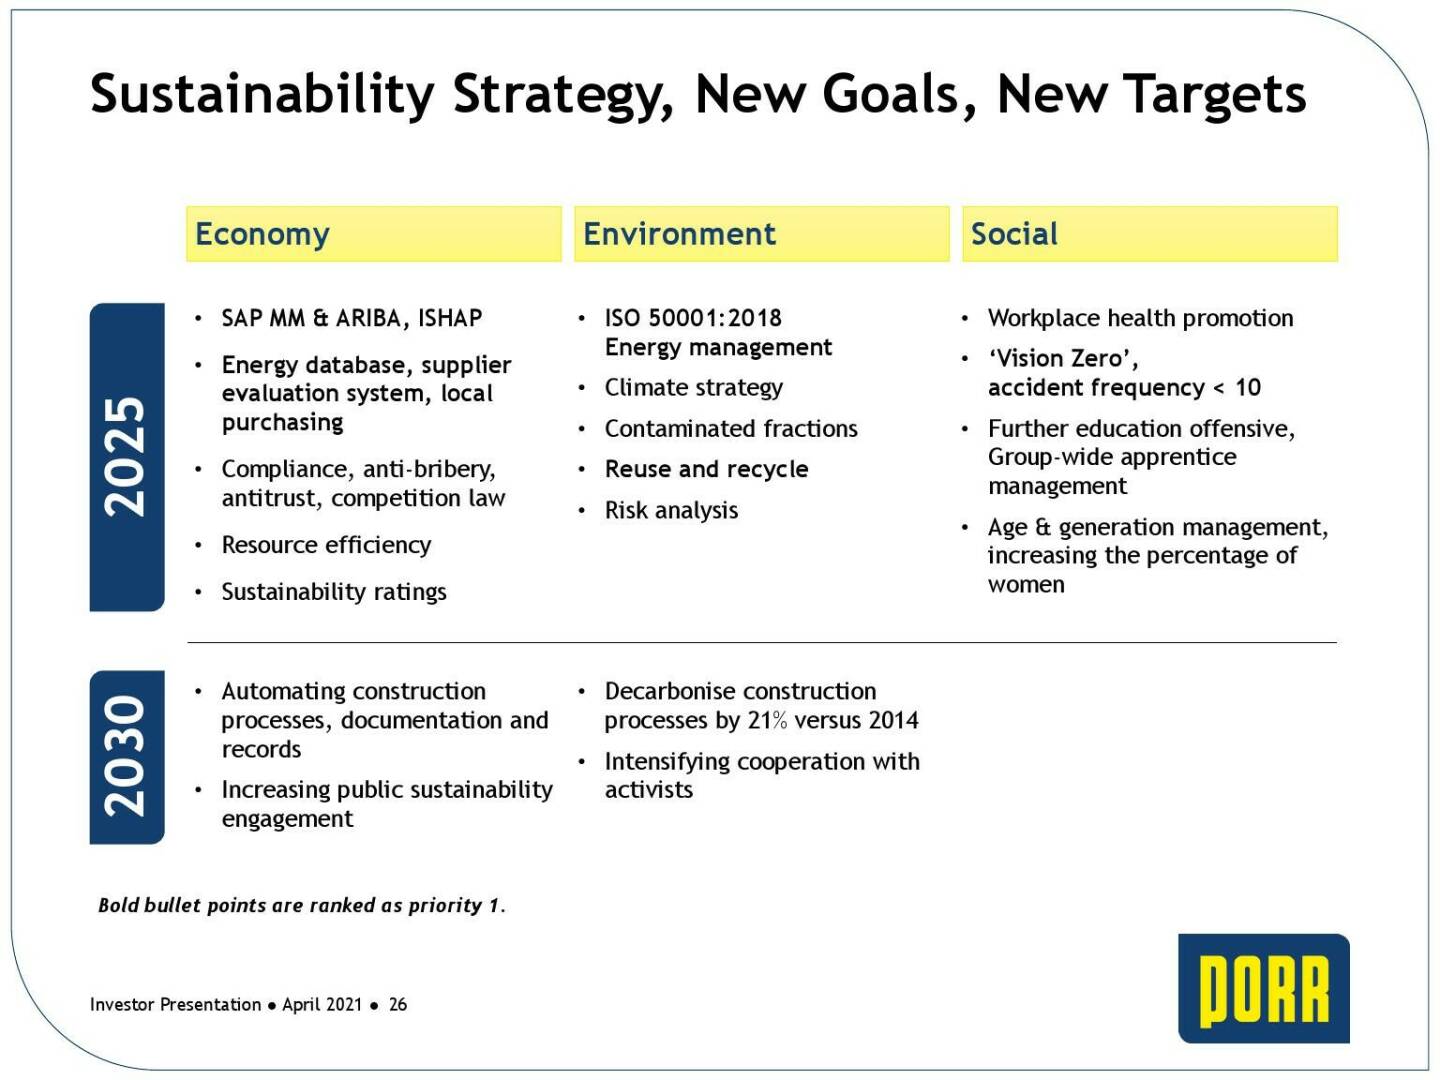 Porr - Sustainability strategy, new goals, new targets